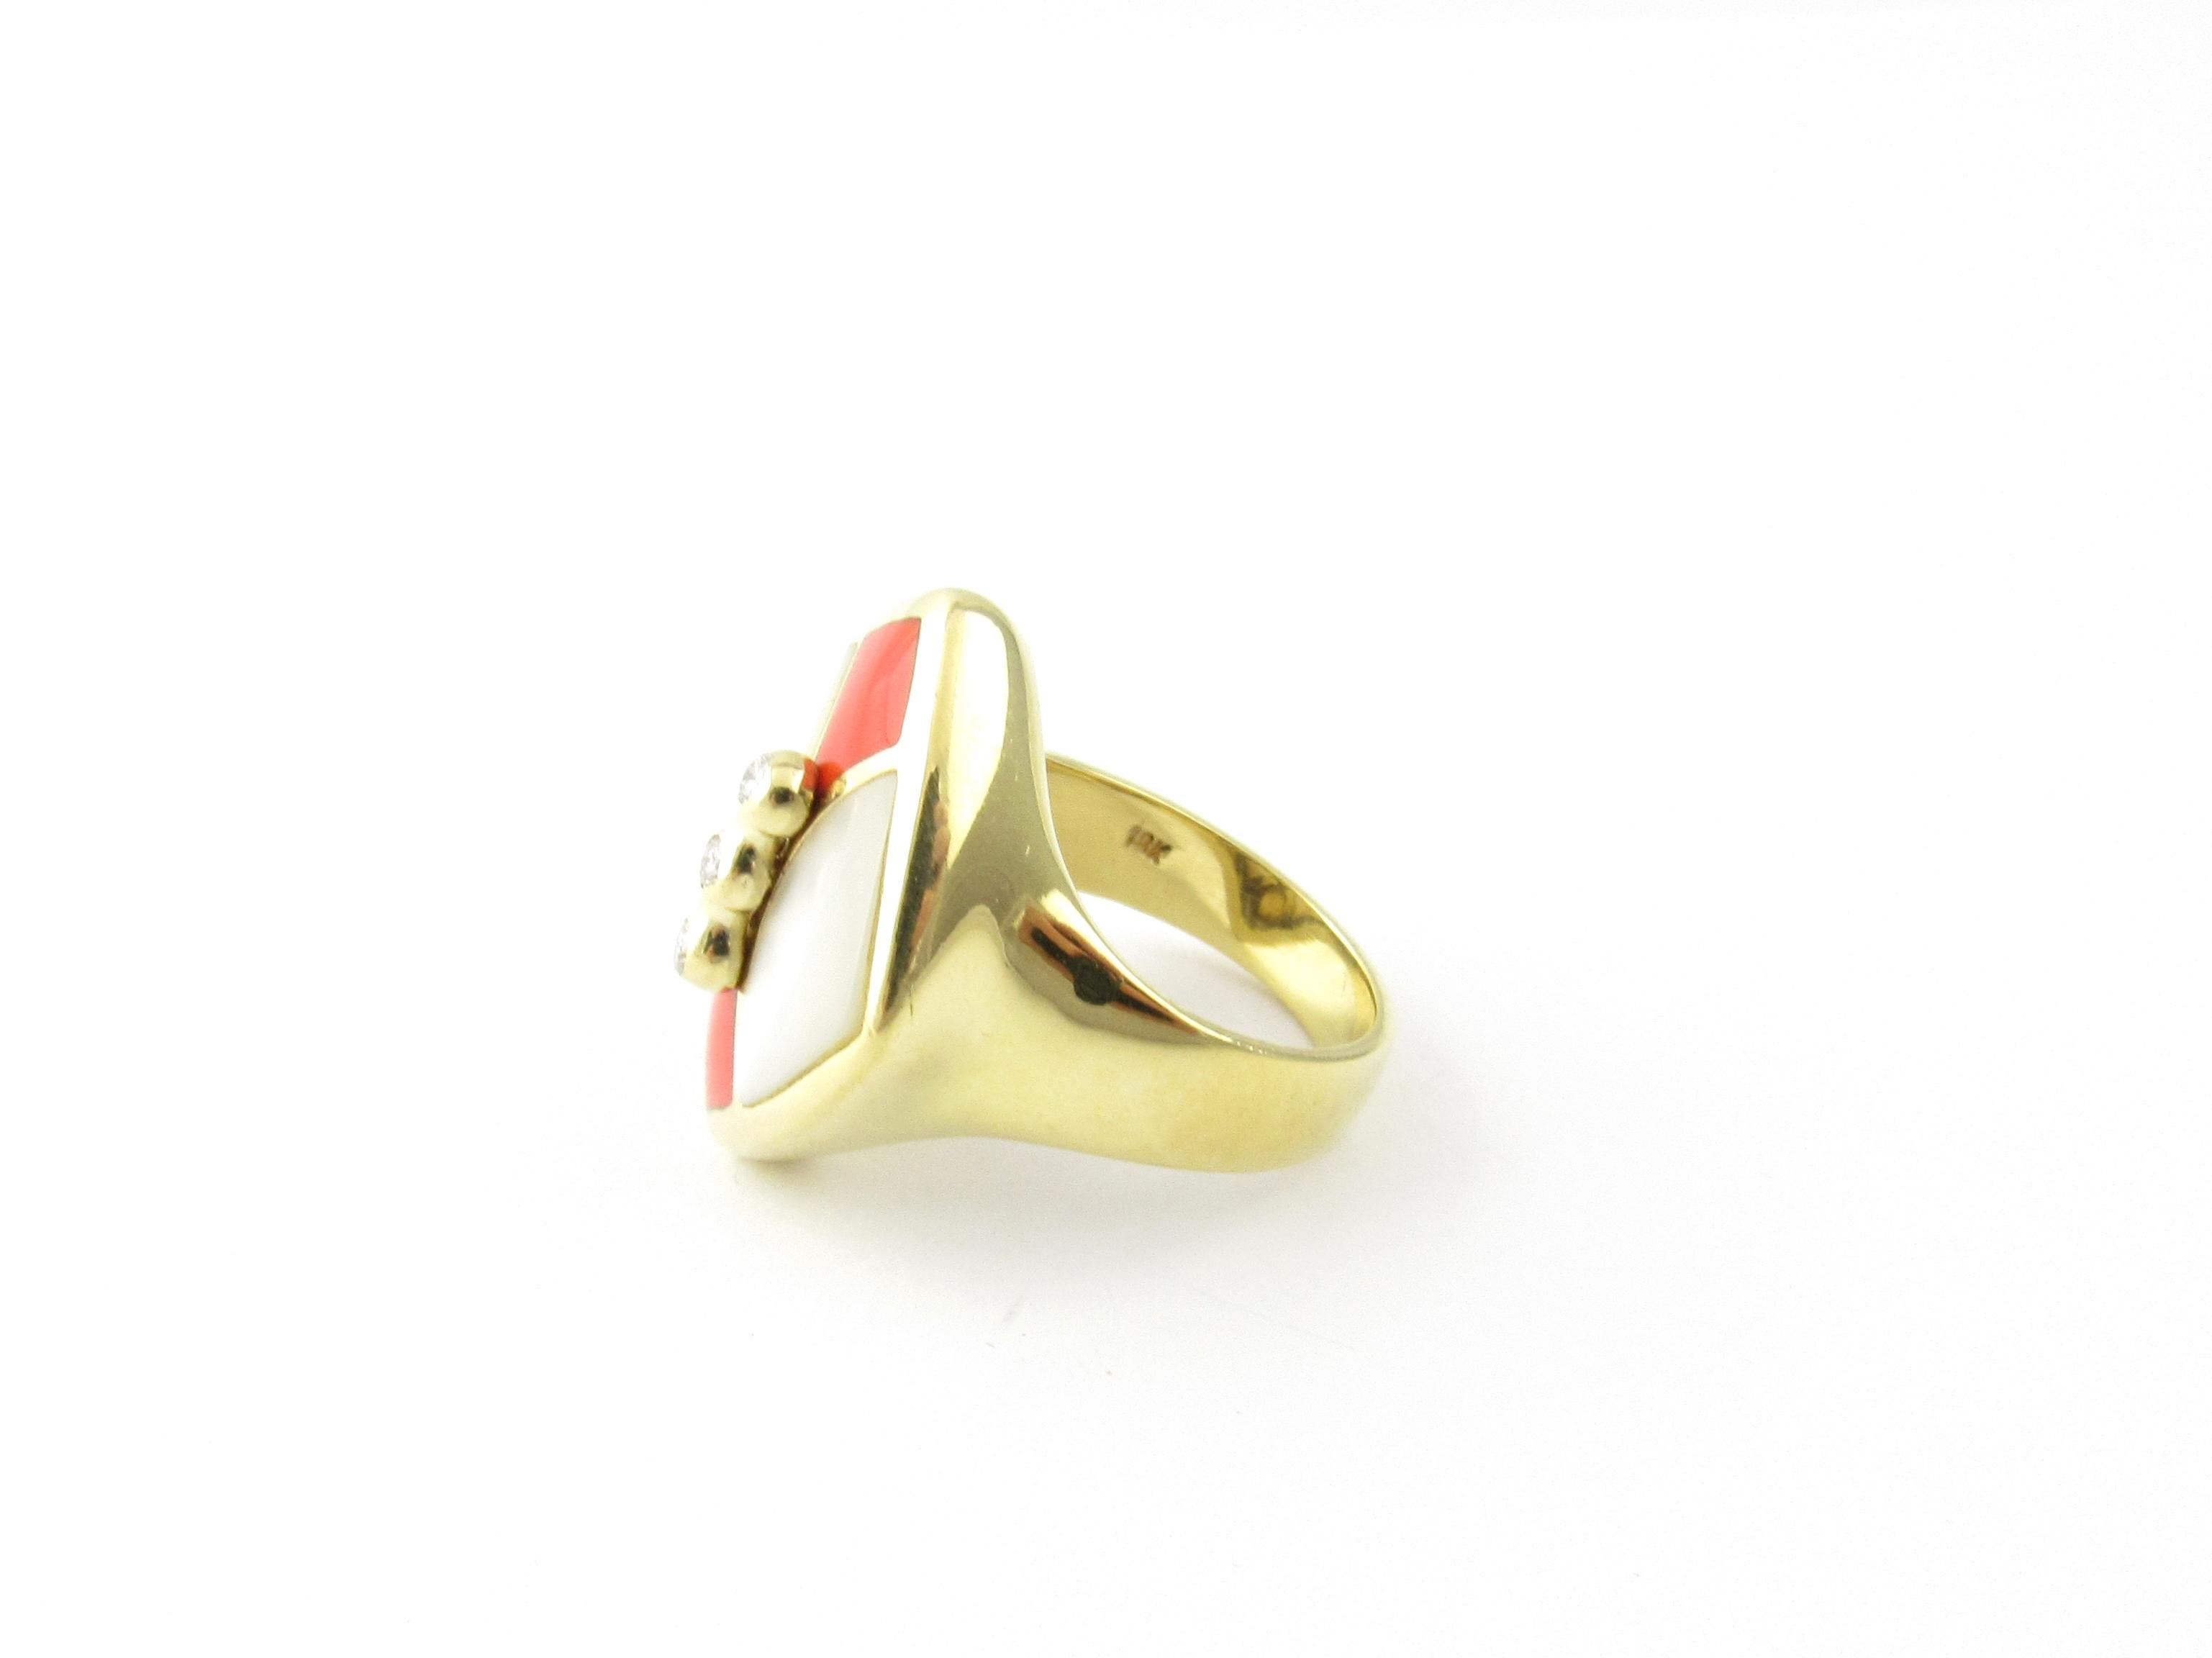 Vintage 18 Karat Yellow Gold Mother of Pearl Enamel and Diamond Ring Size 5.75

This lovely ring is decorated with red enamel, mother of pearl and three round brilliant cut diamond set in classic 18K yellow gold. Top of ring measures 22 mm x 19 mm.